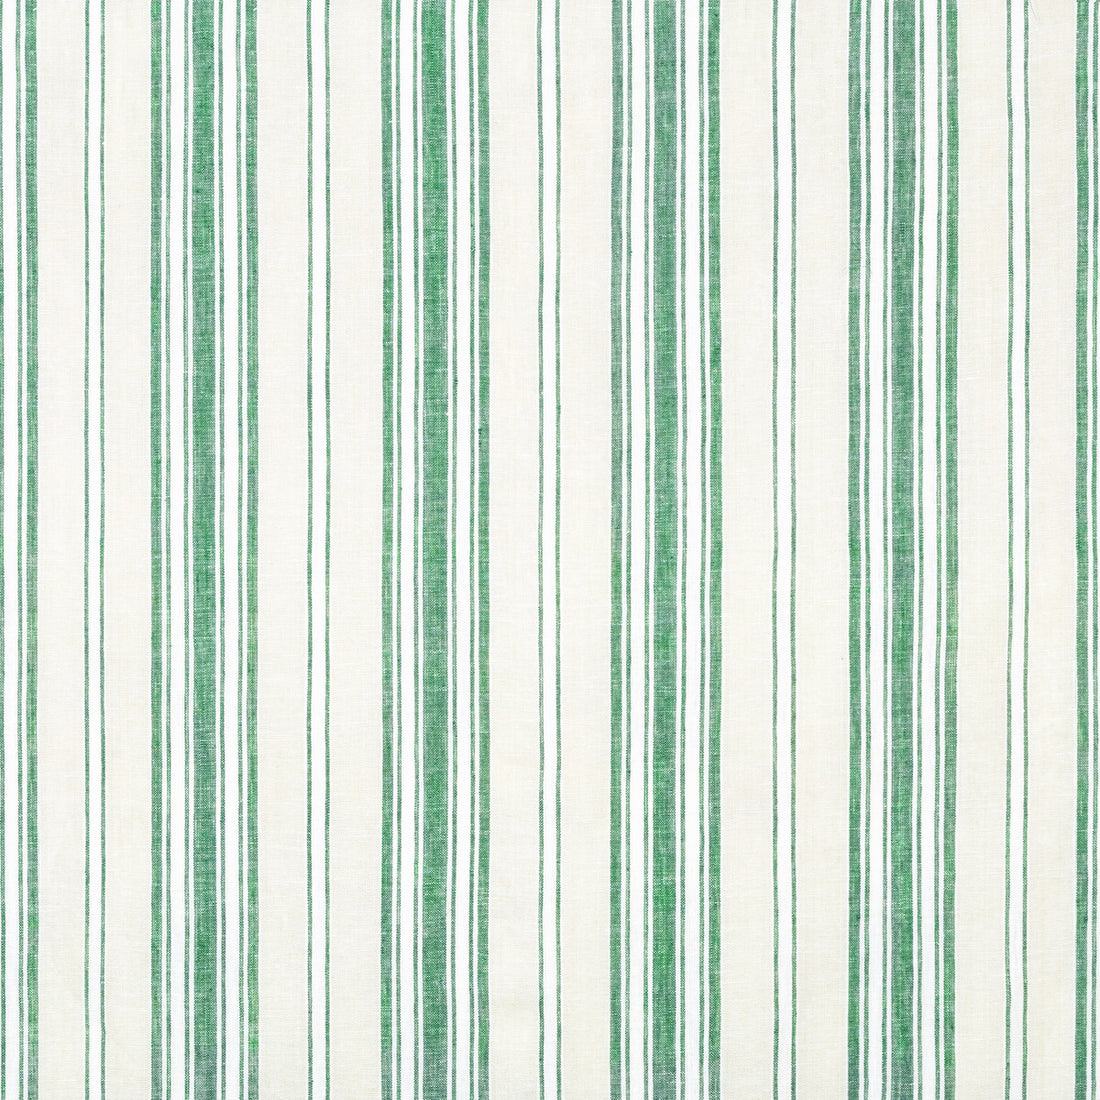 Laurel Stripe fabric in spruce color - pattern 2020189.1630.0 - by Lee Jofa in the Avondale collection